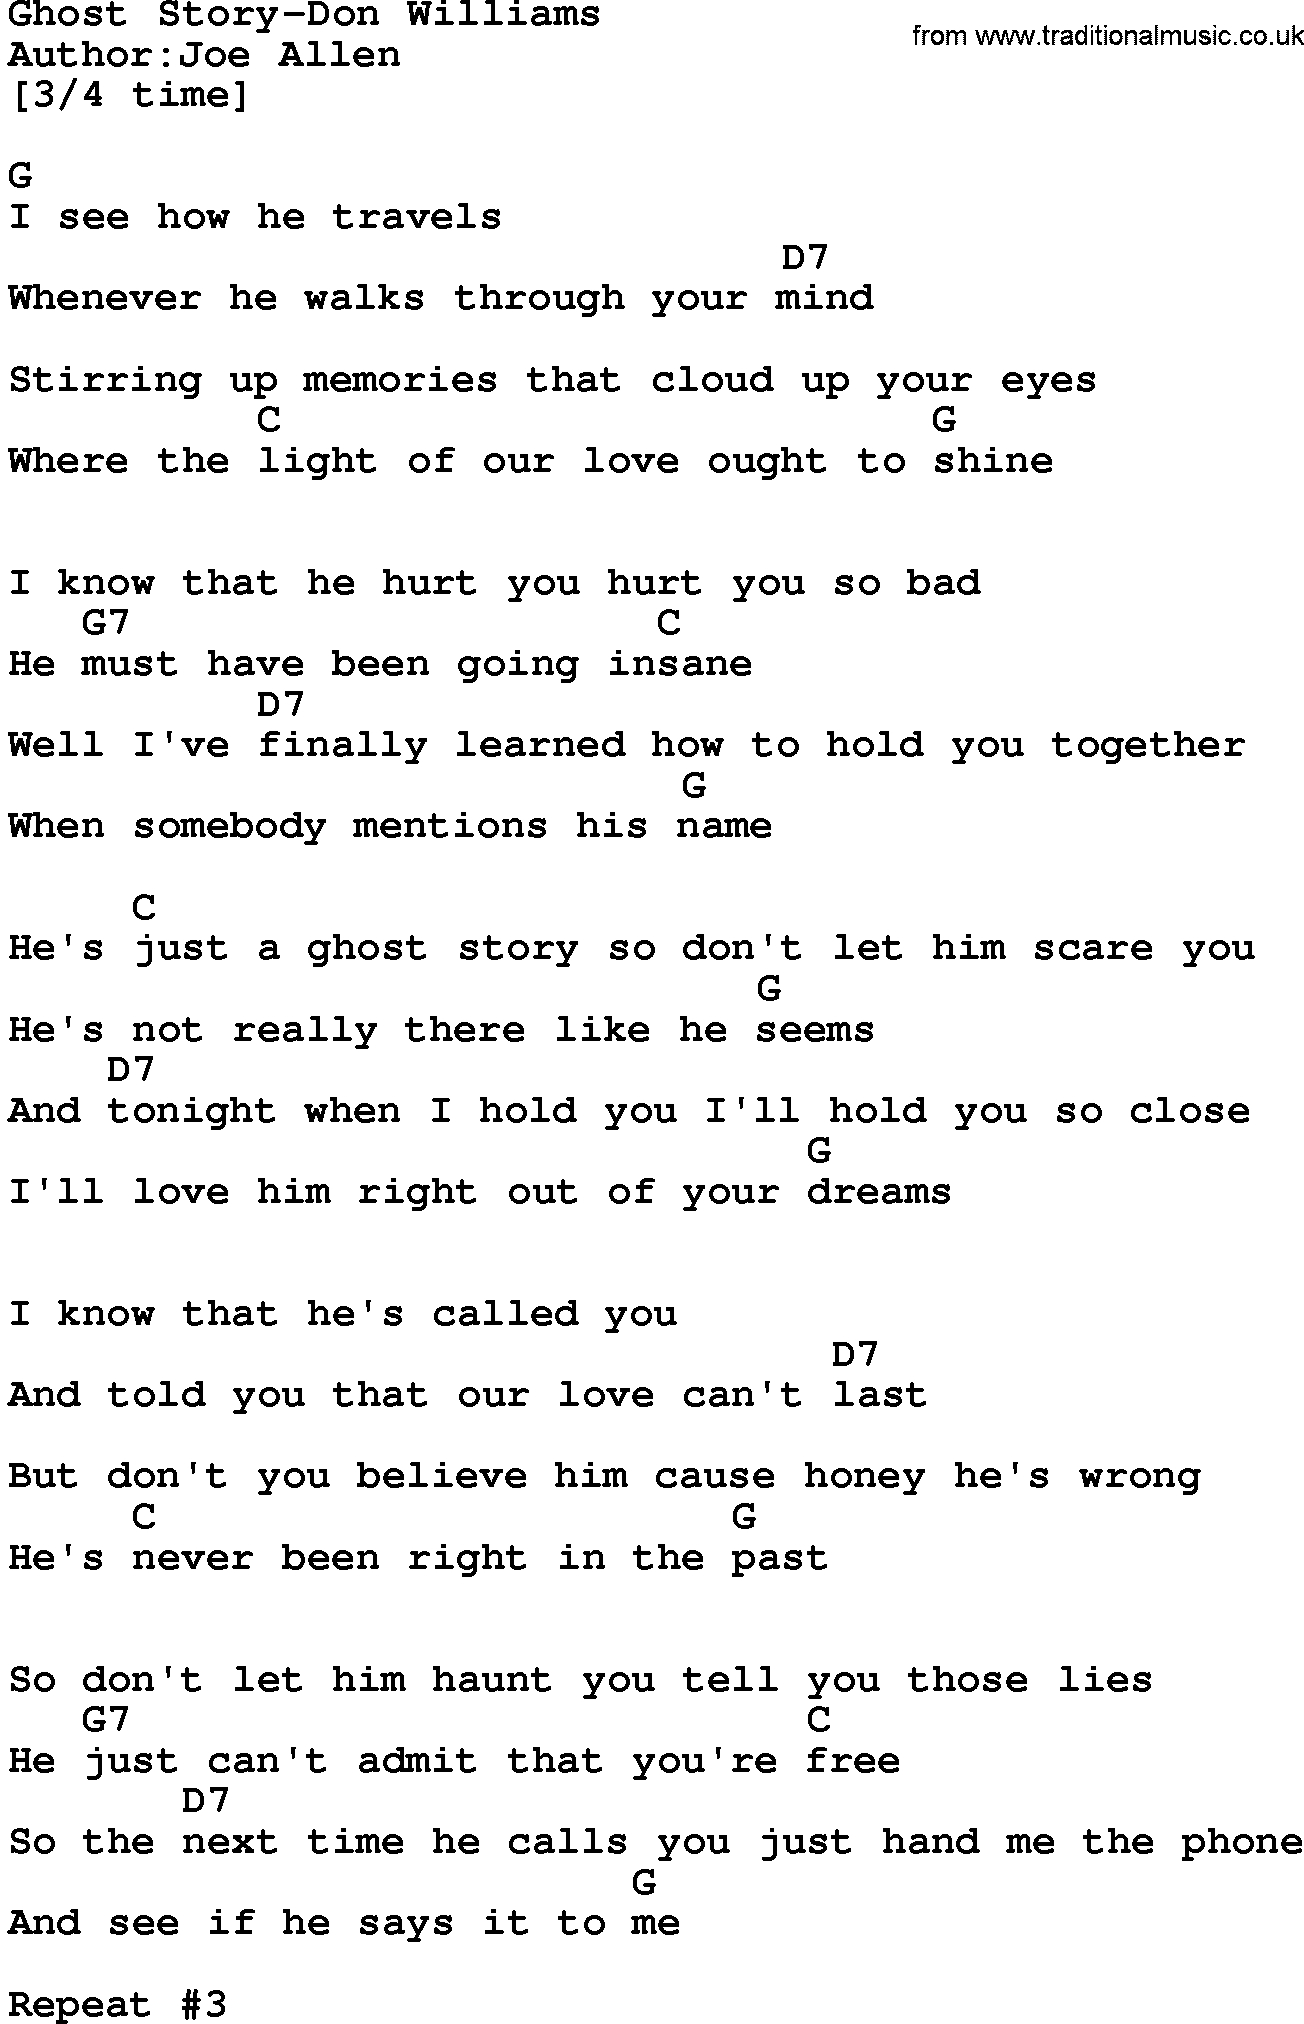 Love Story Chords Country Musicghost Story Don Williams Lyrics And Chords